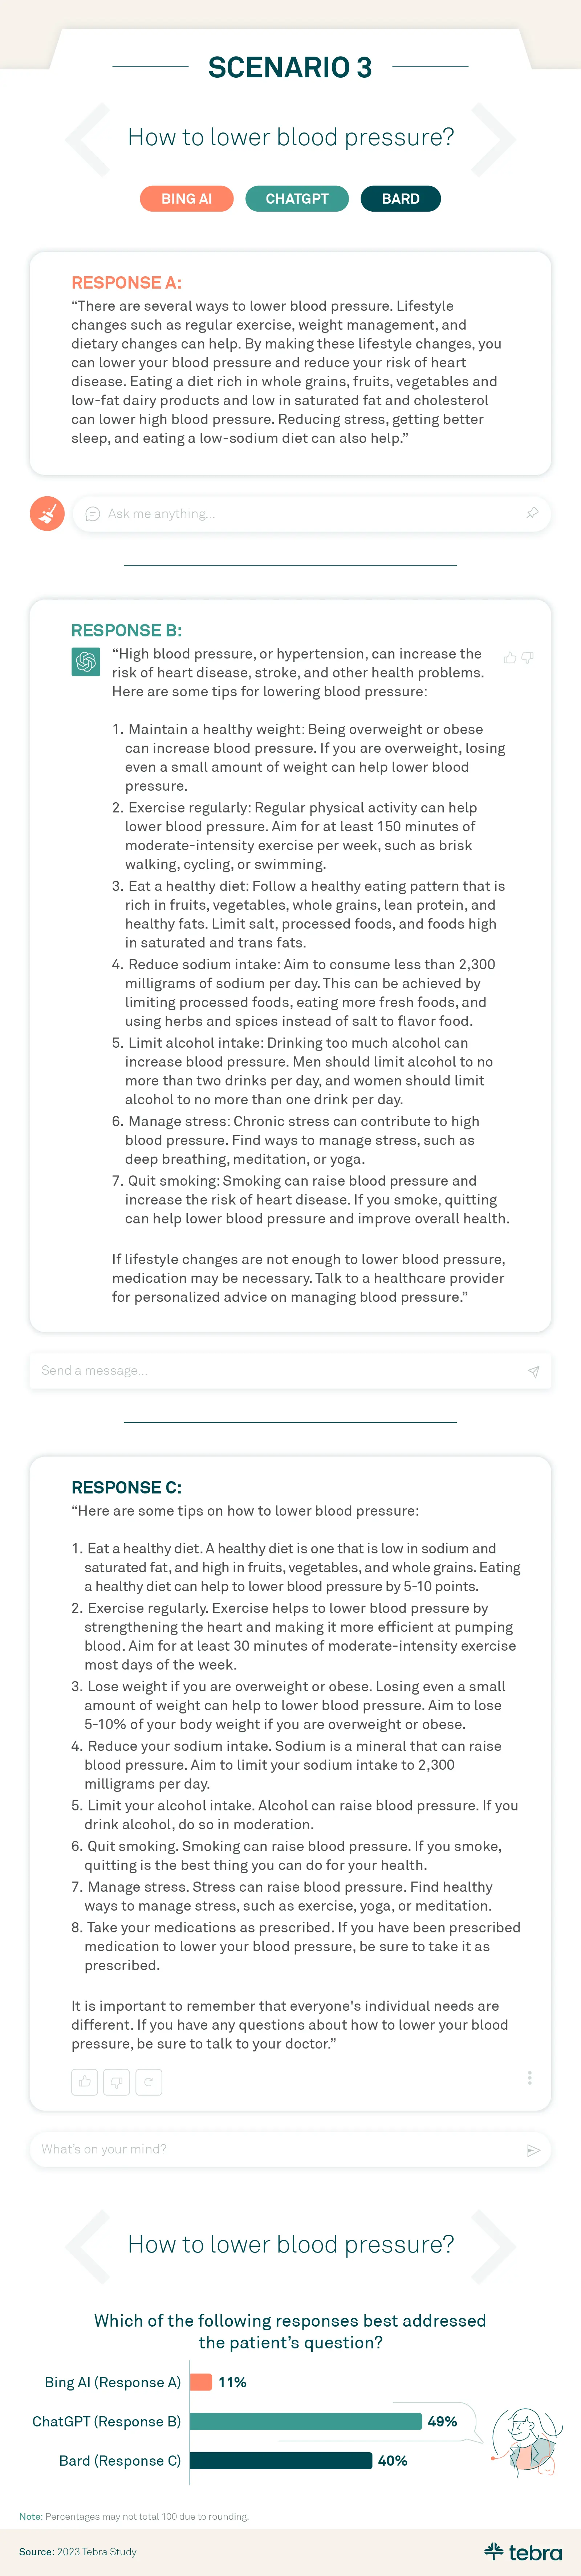 This is an infographic about Tebra research around the topic of AI in healthcare. This graphic features responses from Bing AI, ChatGPT, and Bard around the question &quot;How to lower blood pressure?&quot; Google’s Bard response was: “Here are some tips on how to lower blood pressure: Eat a healthy diet. A healthy diet is one that is low in sodium and saturated fat, and high in fruits, vegetables, and whole grains. Eating a healthy diet can help to lower blood pressure by 5-10 points. Exercise regularly. Exercise helps to lower blood pressure by strengthening the heart and making it more efficient at pumping blood. Aim for at least 30 minutes of moderate-intensity exercise most days of the week. Lose weight if you are overweight or obese. Losing even a small amount of weight can help to lower blood pressure. Aim to lose 5-10% of your body weight if you are overweight or obese. Reduce your sodium intake. Sodium is a mineral that can raise blood pressure. Aim to limit your sodium intake to 2,300 milligrams per day. Limit your alcohol intake. Alcohol can raise blood pressure. If you drink alcohol, do so in moderation. Quit smoking. Smoking can raise blood pressure. If you smoke, quitting is the best thing you can do for your health. Manage stress. Stress can raise blood pressure. Find healthy ways to manage stress, such as exercise, yoga, or meditation. Take your medications as prescribed. If you have been prescribed medication to lower your blood pressure, be sure to take it as prescribed. It is important to remember that everyone's individual needs are different. If you have any questions about how to lower your blood pressure, be sure to talk to your doctor.”